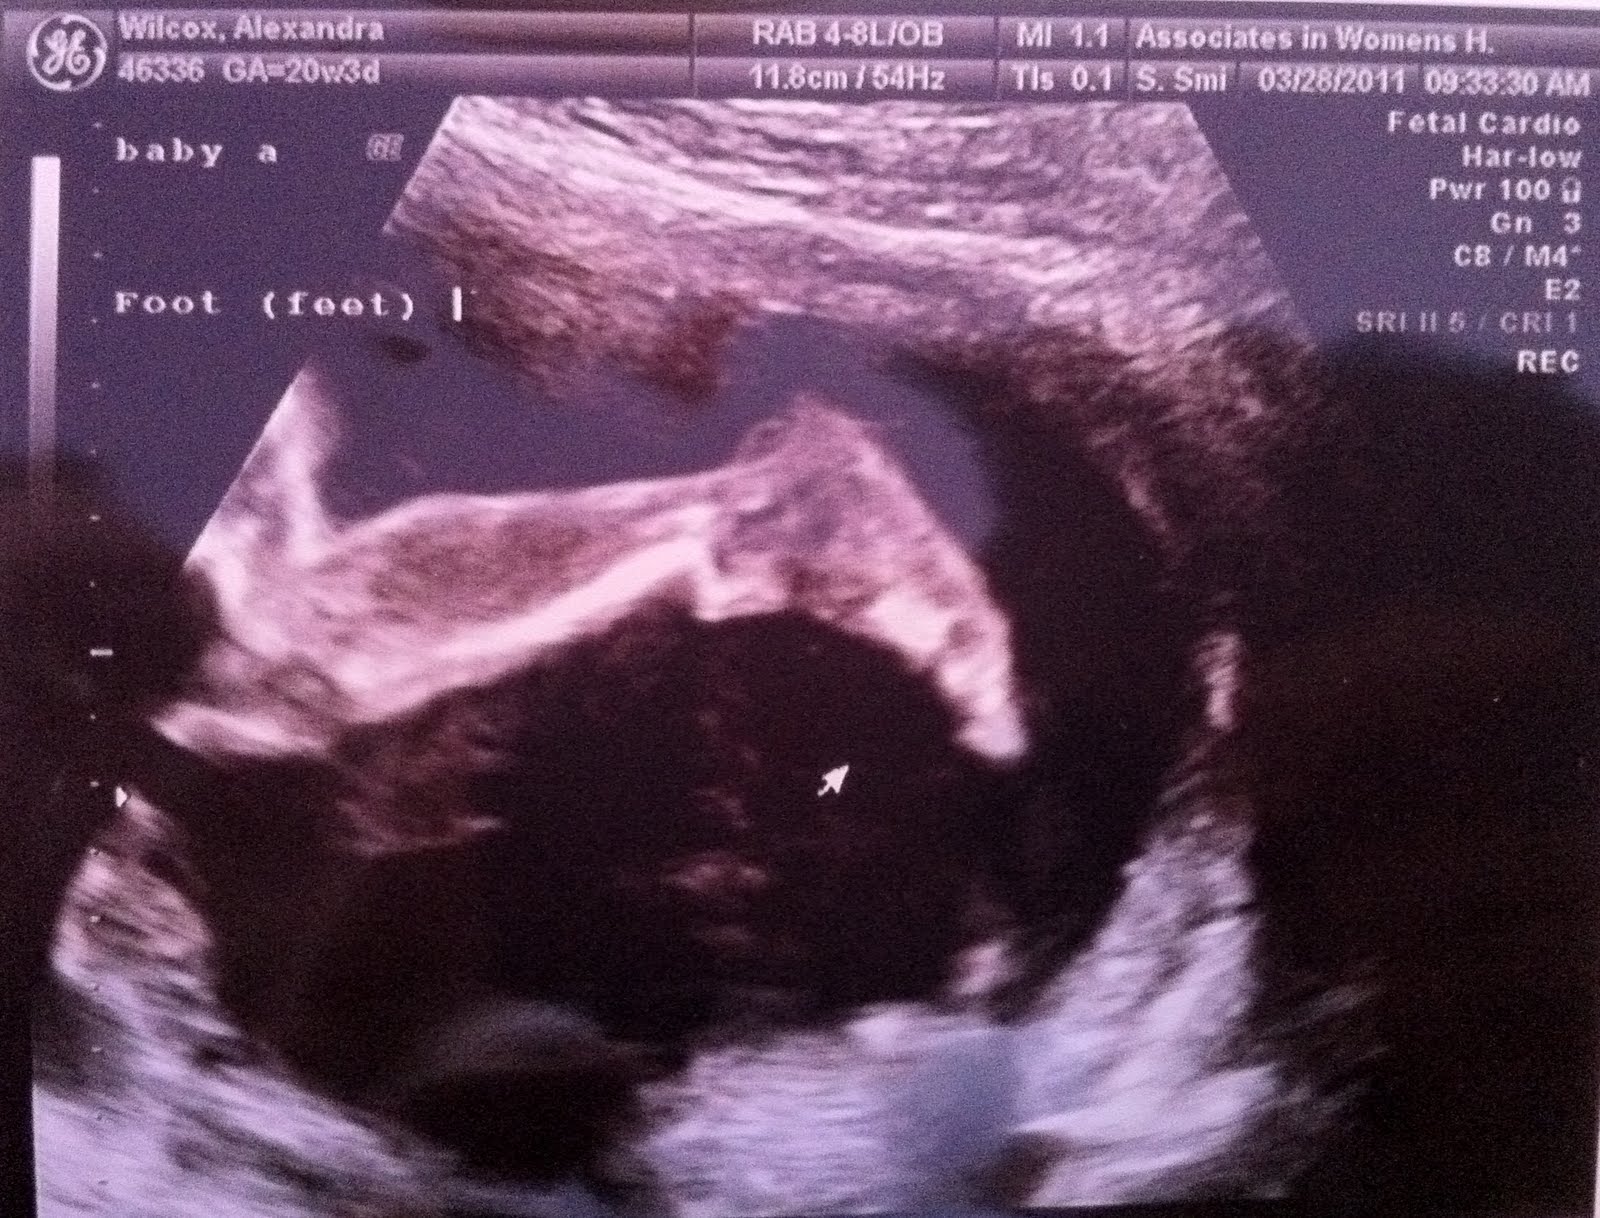 Baby Wilcox #2.... and #3: 20 week appointment/ ultrasound